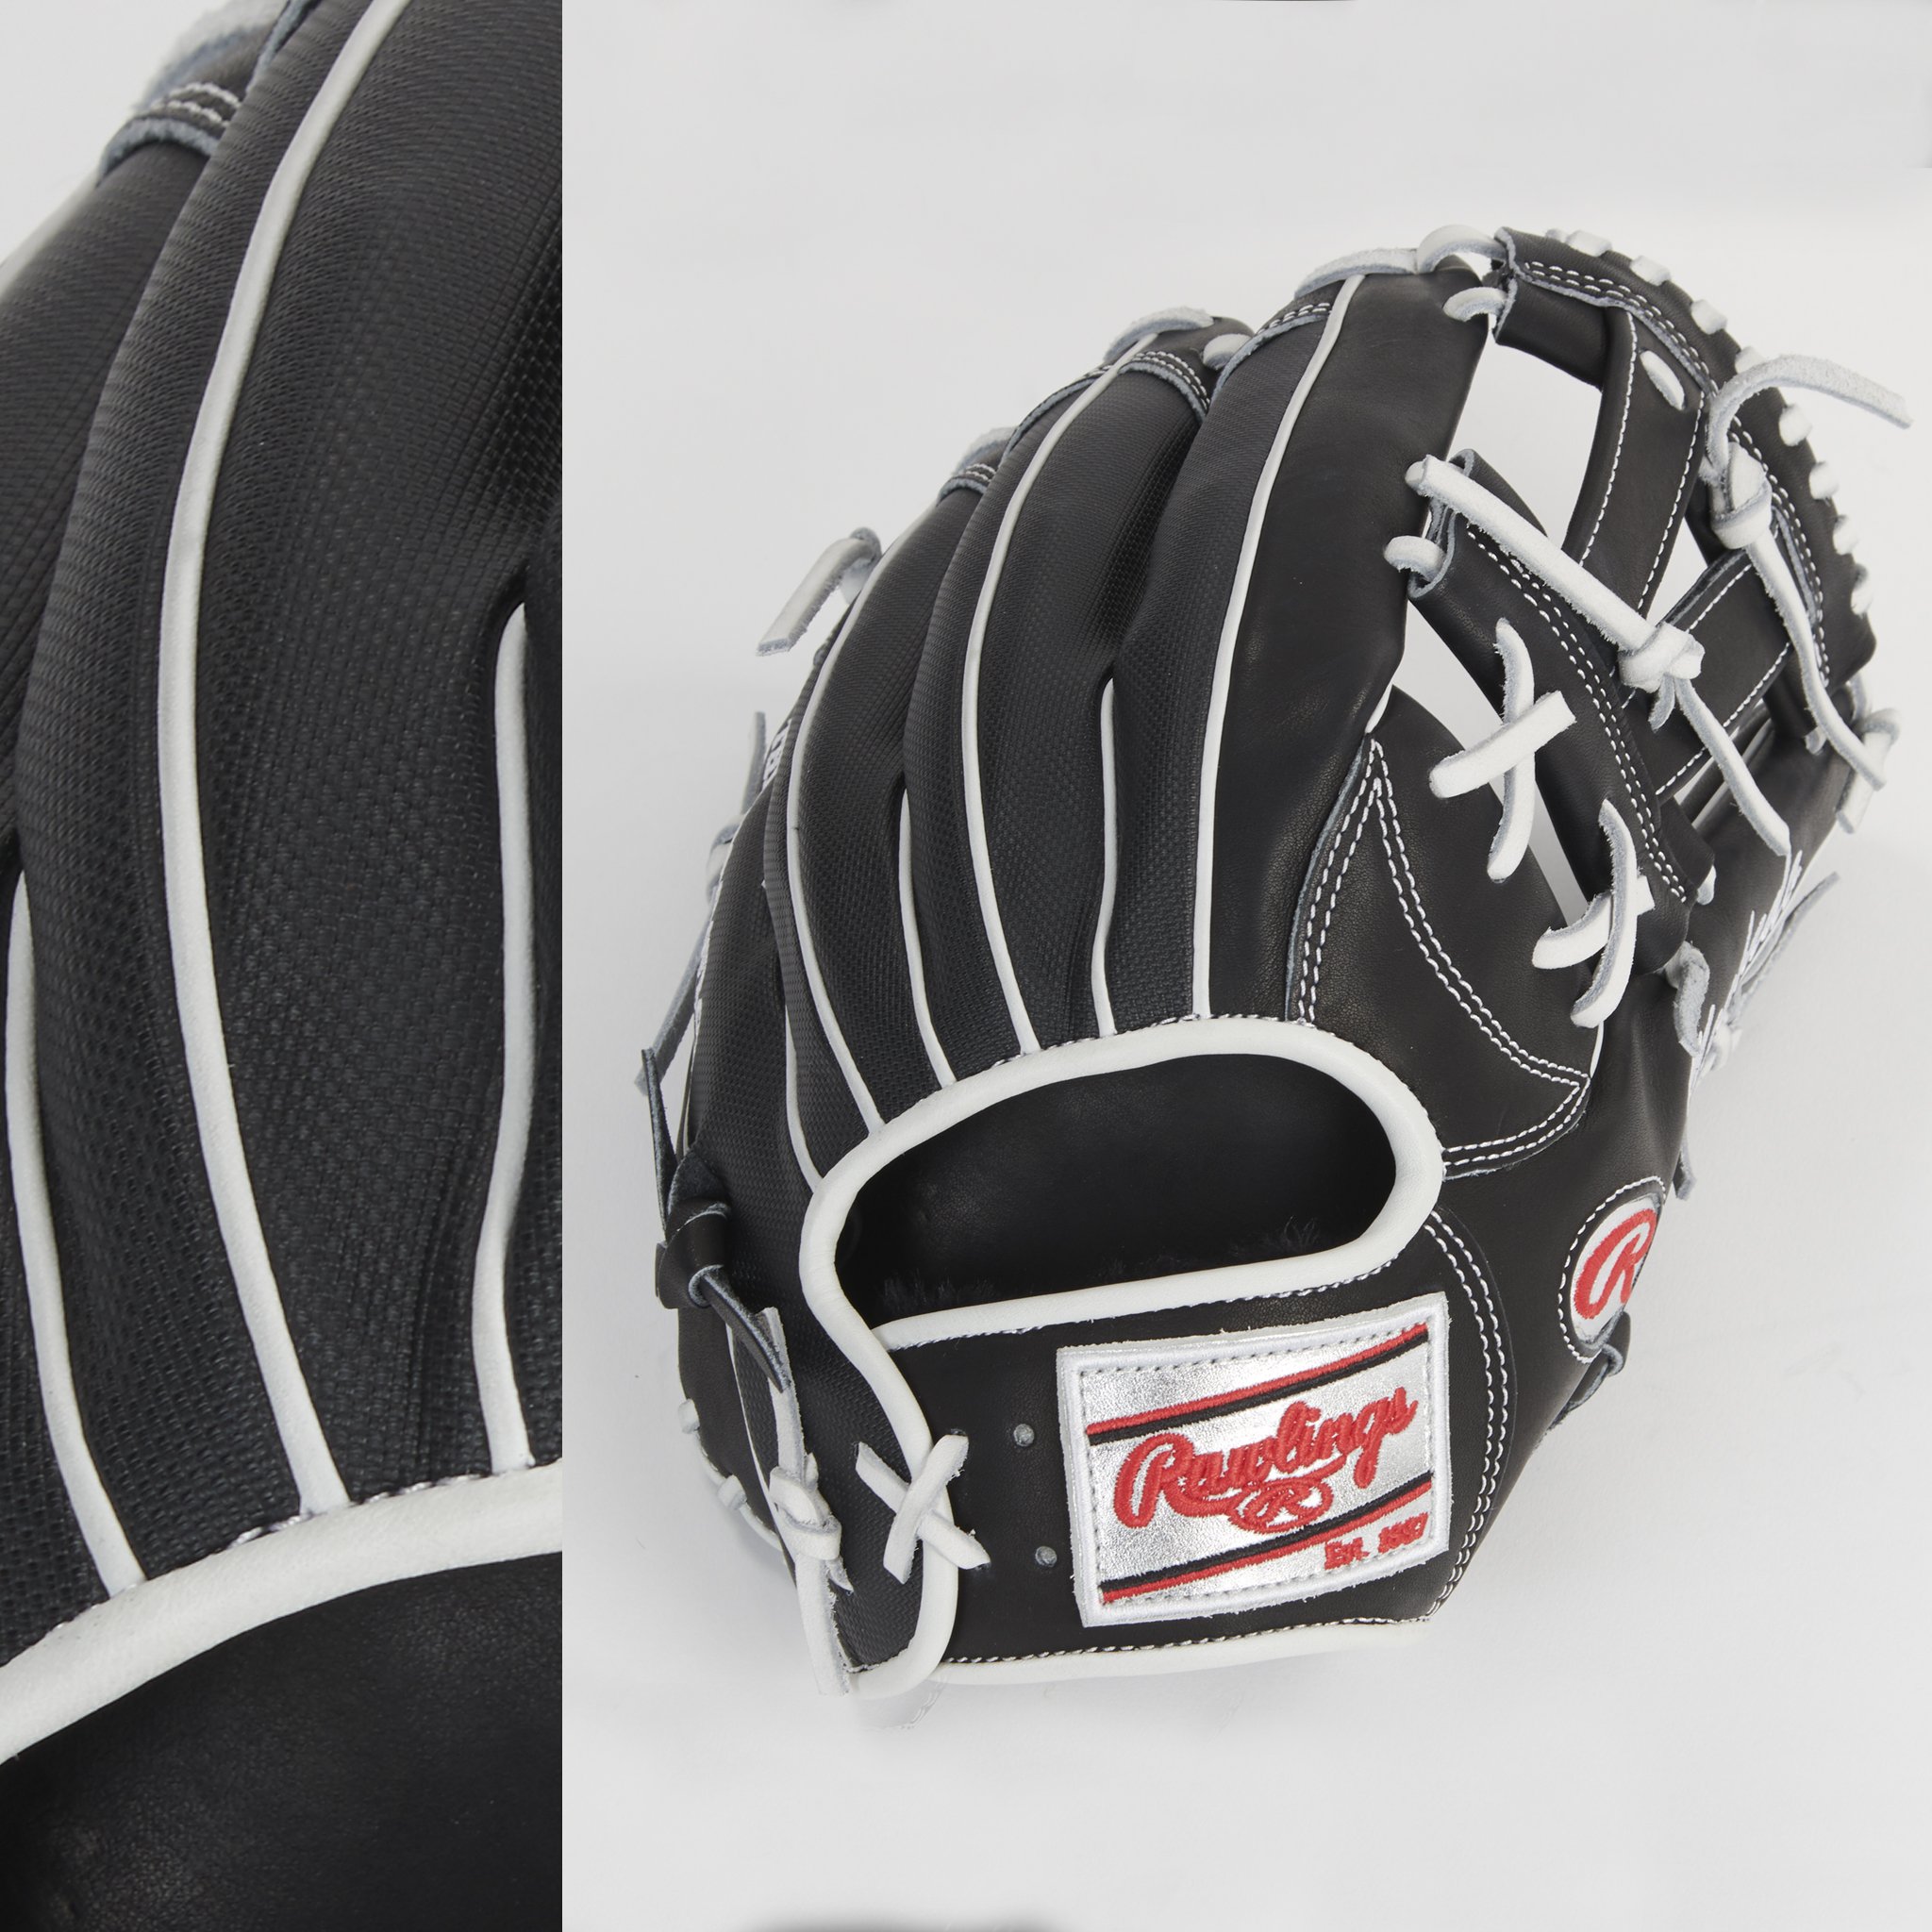 Rawlings Baseball on X: Check out Manny Machado's gloves for this season!  Where do you think he is going to play this season? Is the black and white  a sign?? #TeamRawlings  /